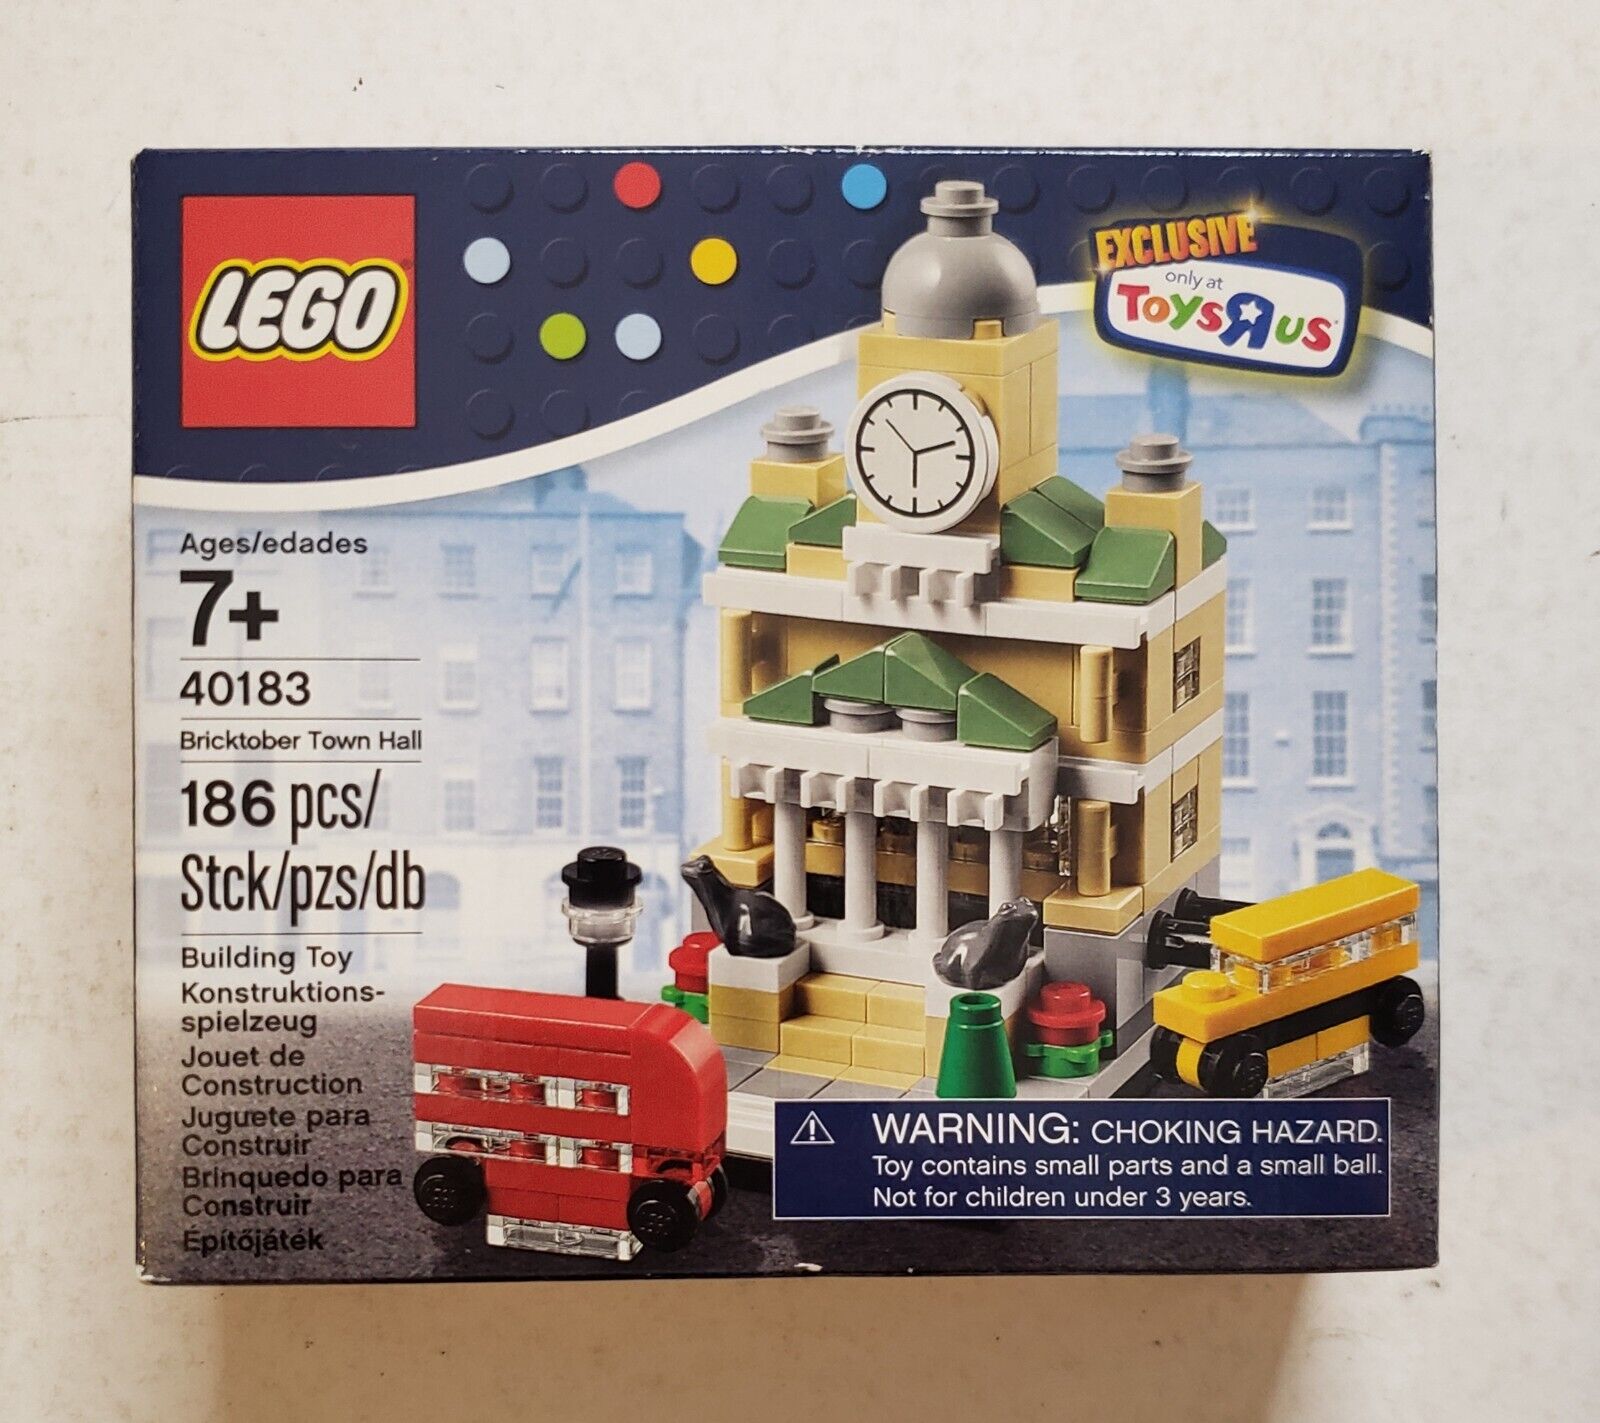 Lego 40183 Bricktober Town Hall NEW Toys R Us ESTABLISHED EXPERIENCED SELLER